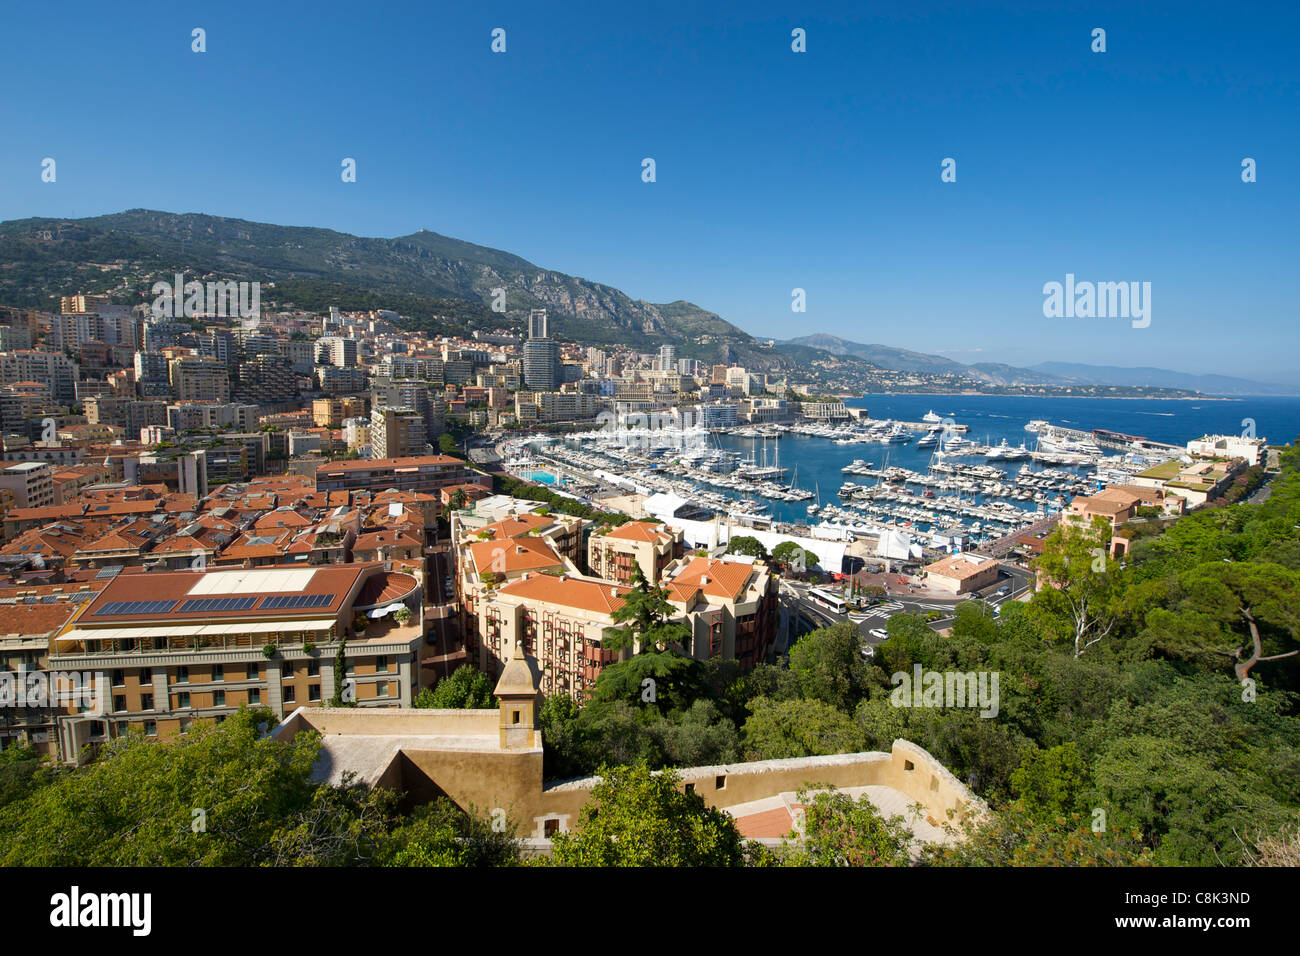 View of Port Hercule and the city and Principality of Monaco on the French Riviera along the Mediterranean coast. Stock Photo